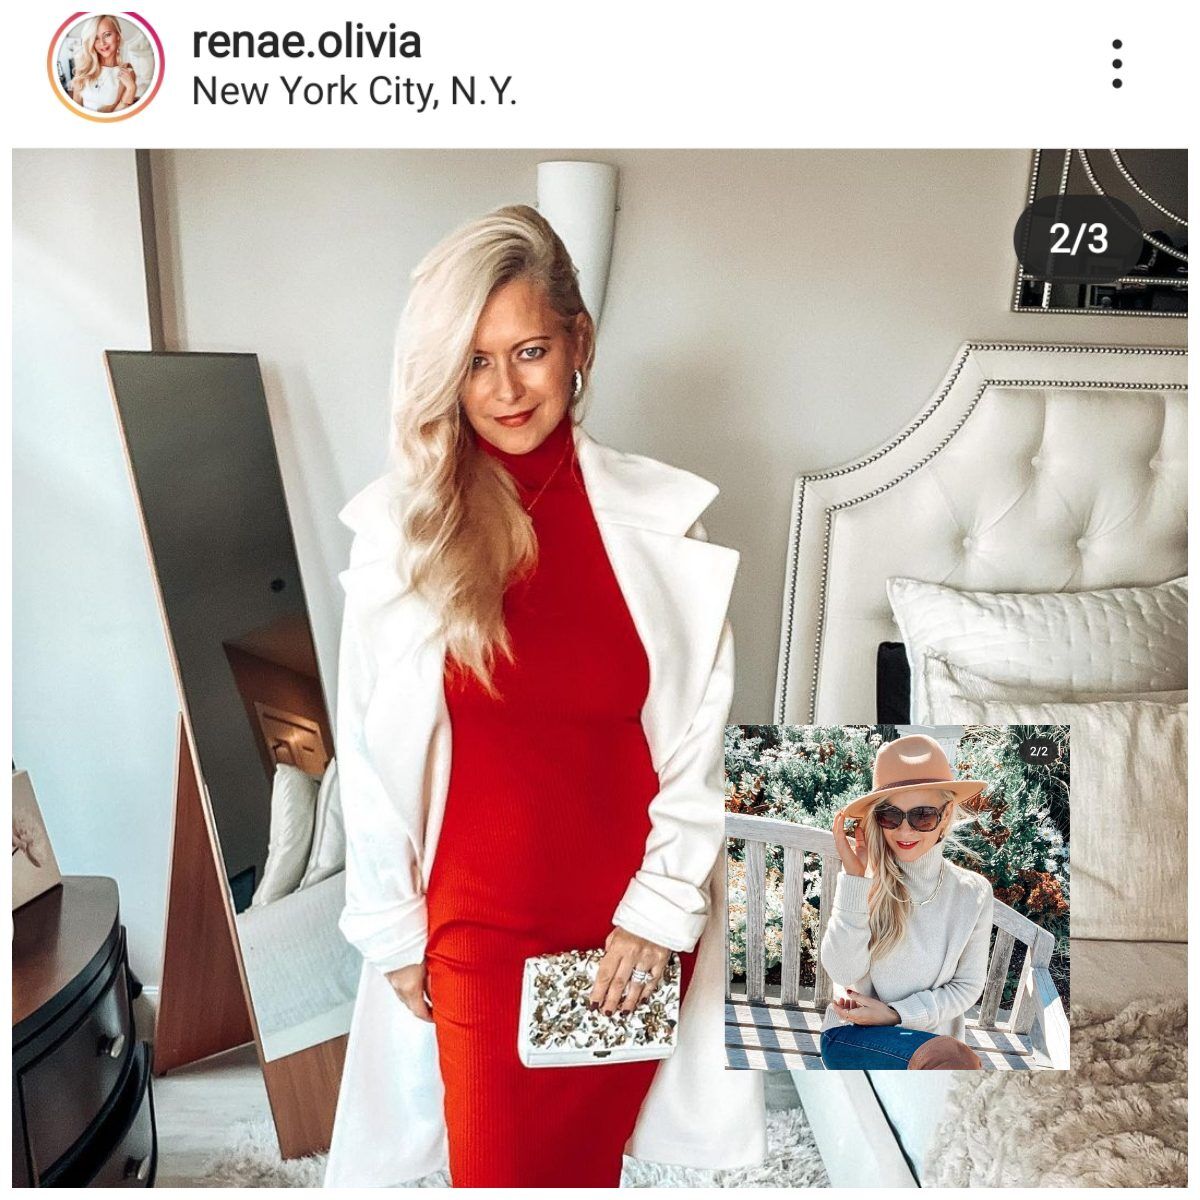 Renae Olivia - Your Ultimate Social Beauty Influence, Regardless of Age